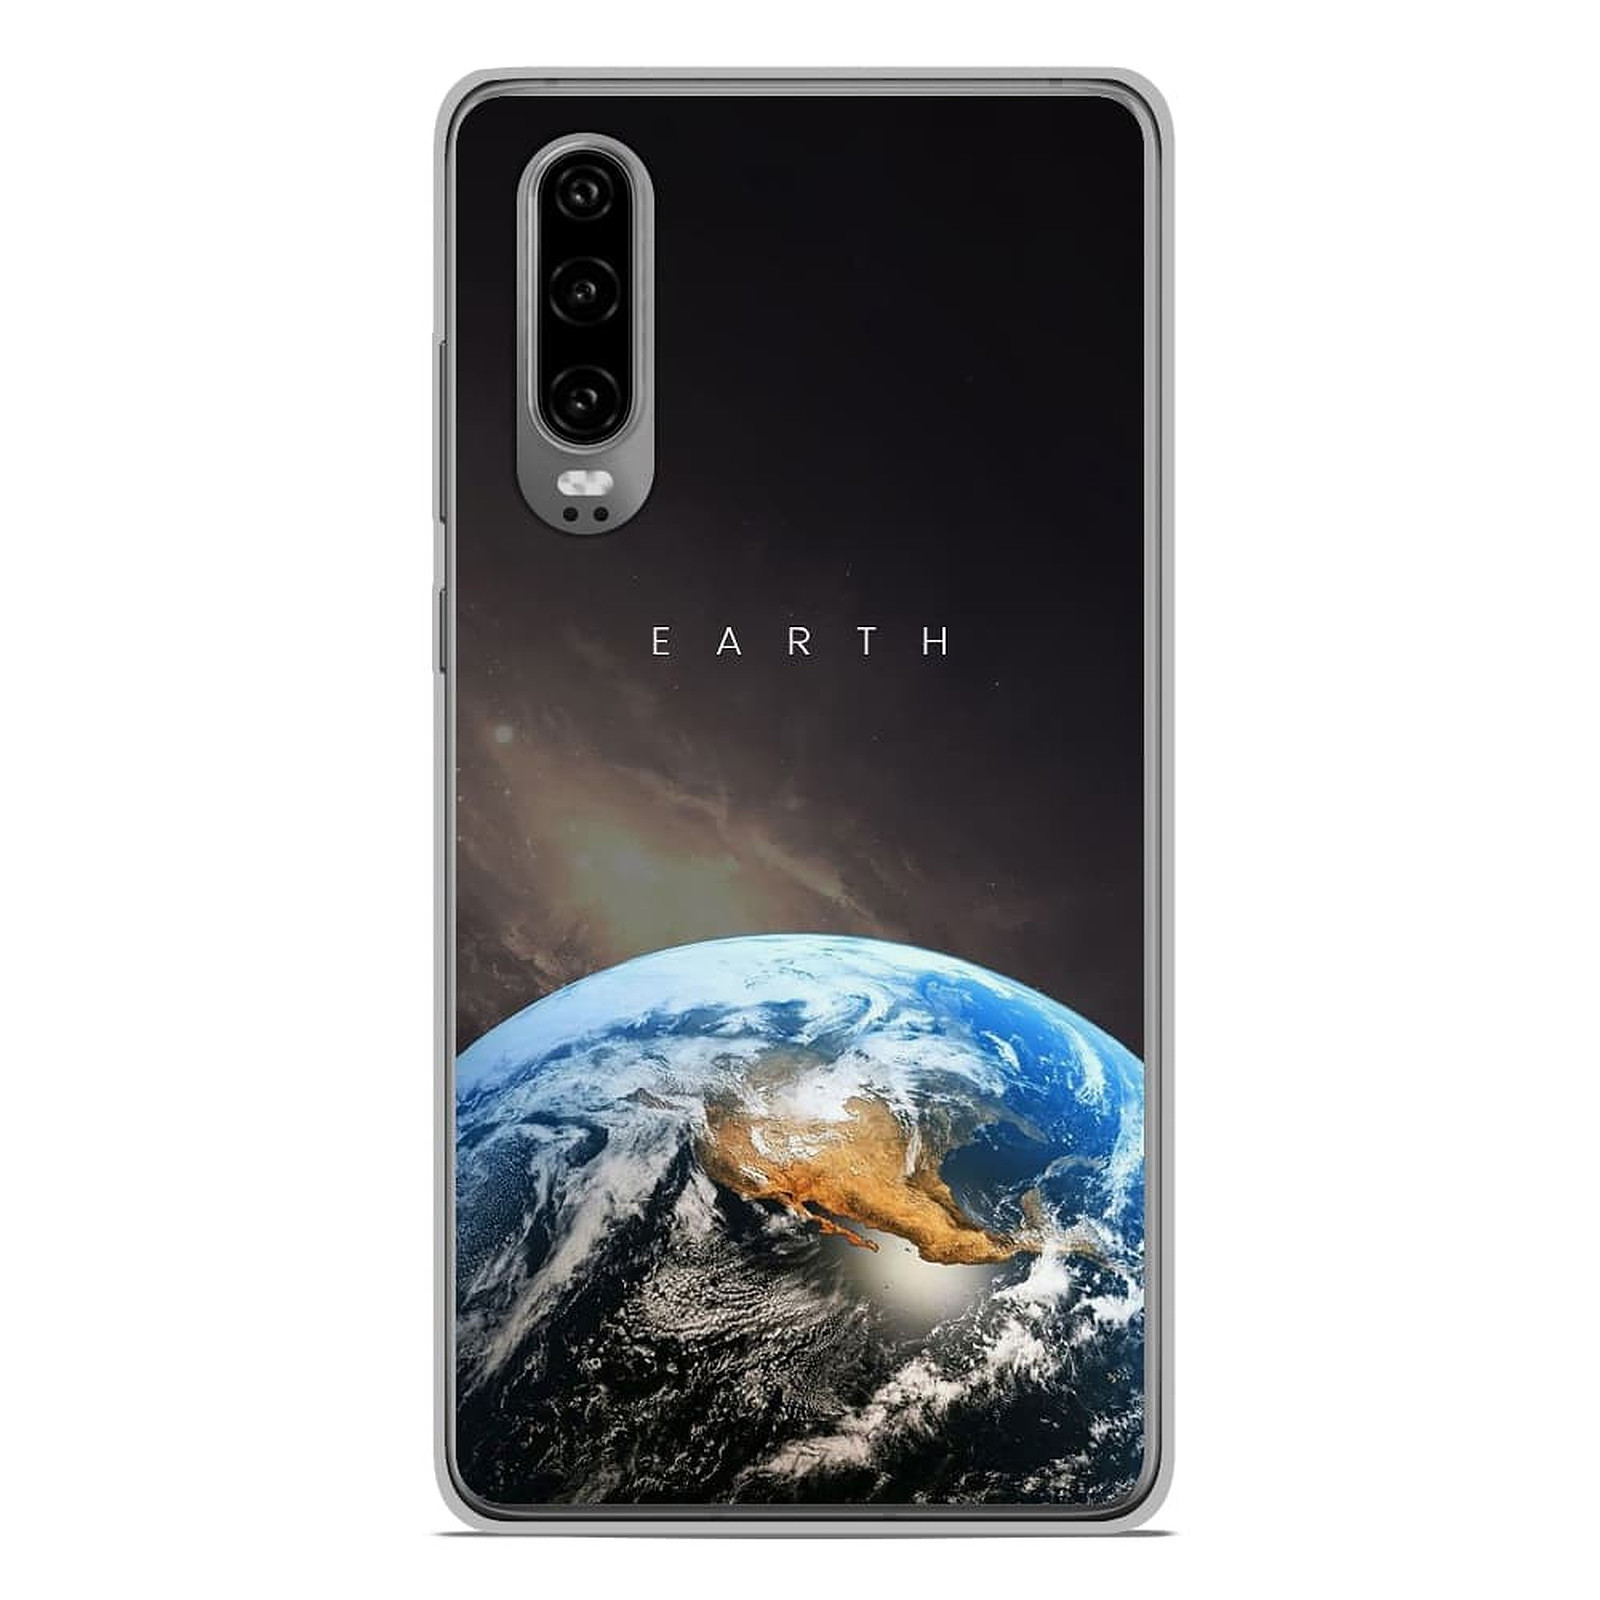 1001 Coques Coque silicone gel Huawei P30 motif Earth - Coque telephone 1001Coques